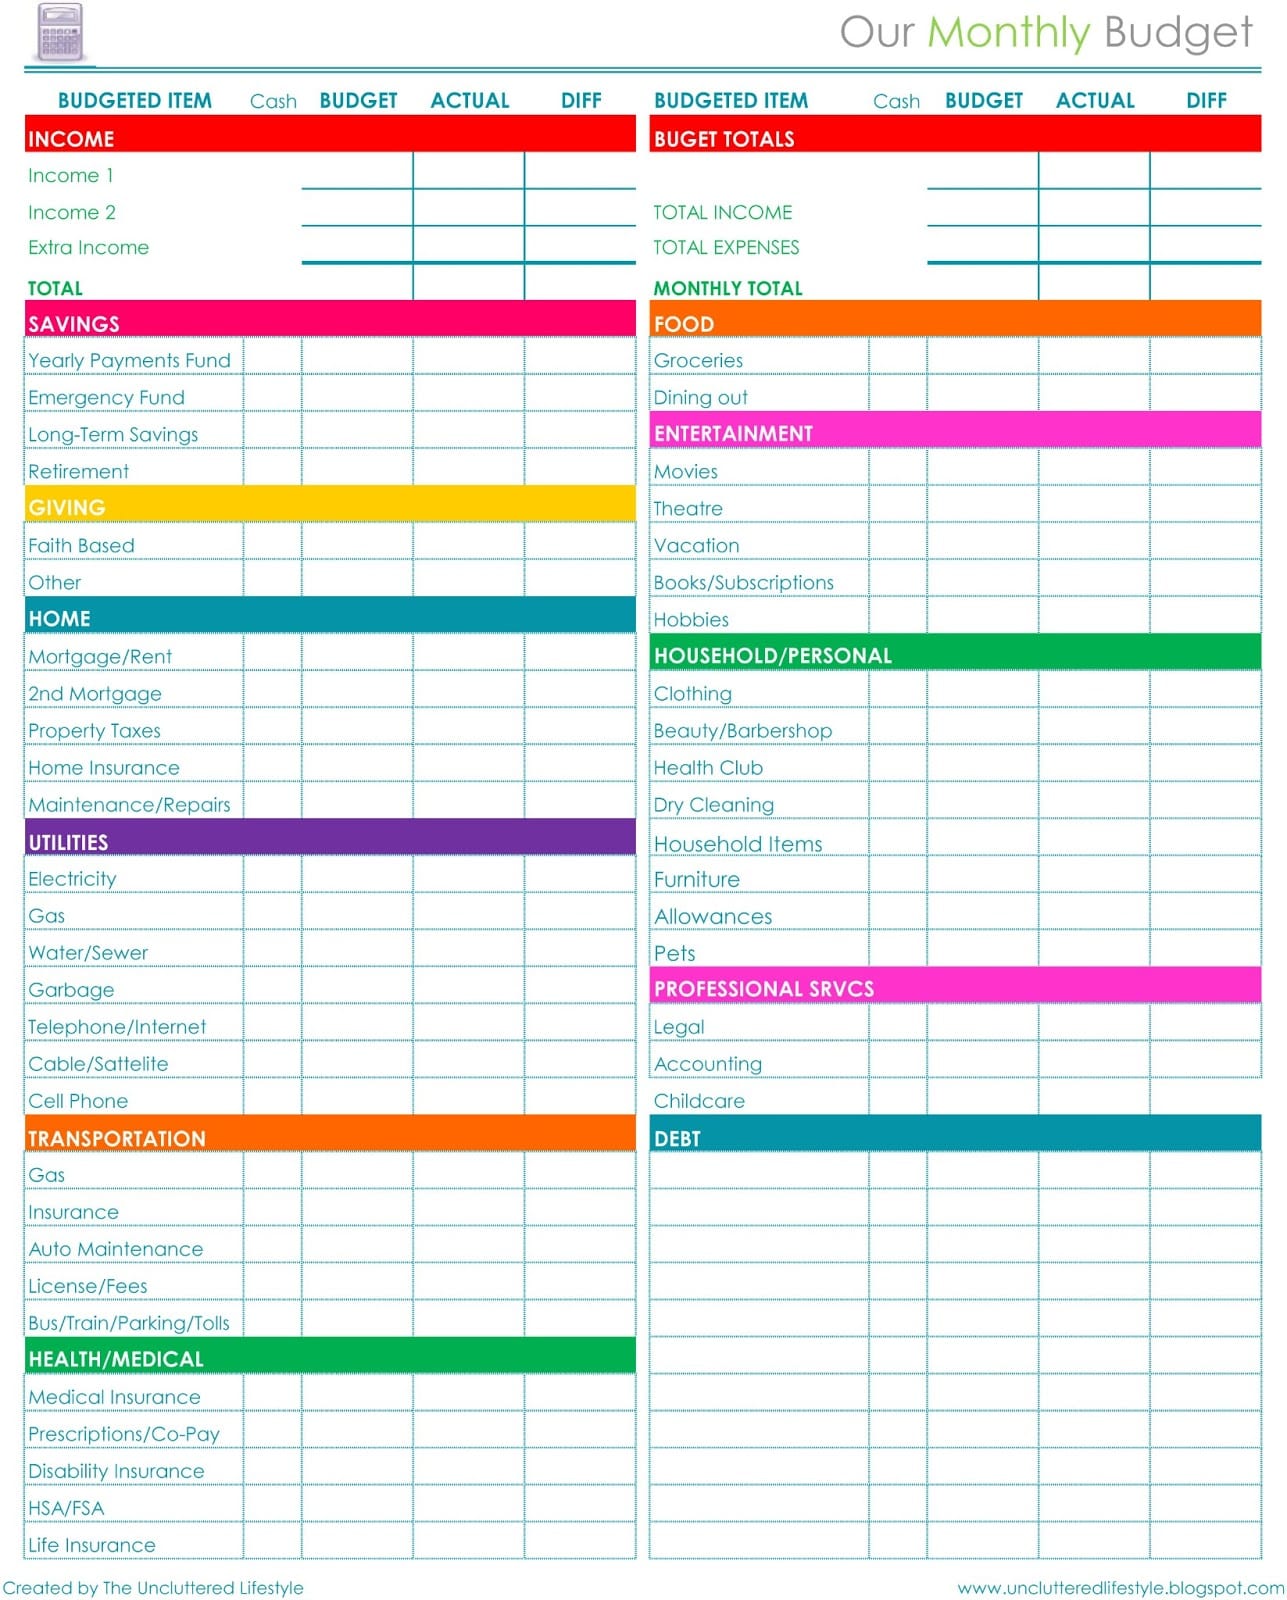 excel travel budget planner template